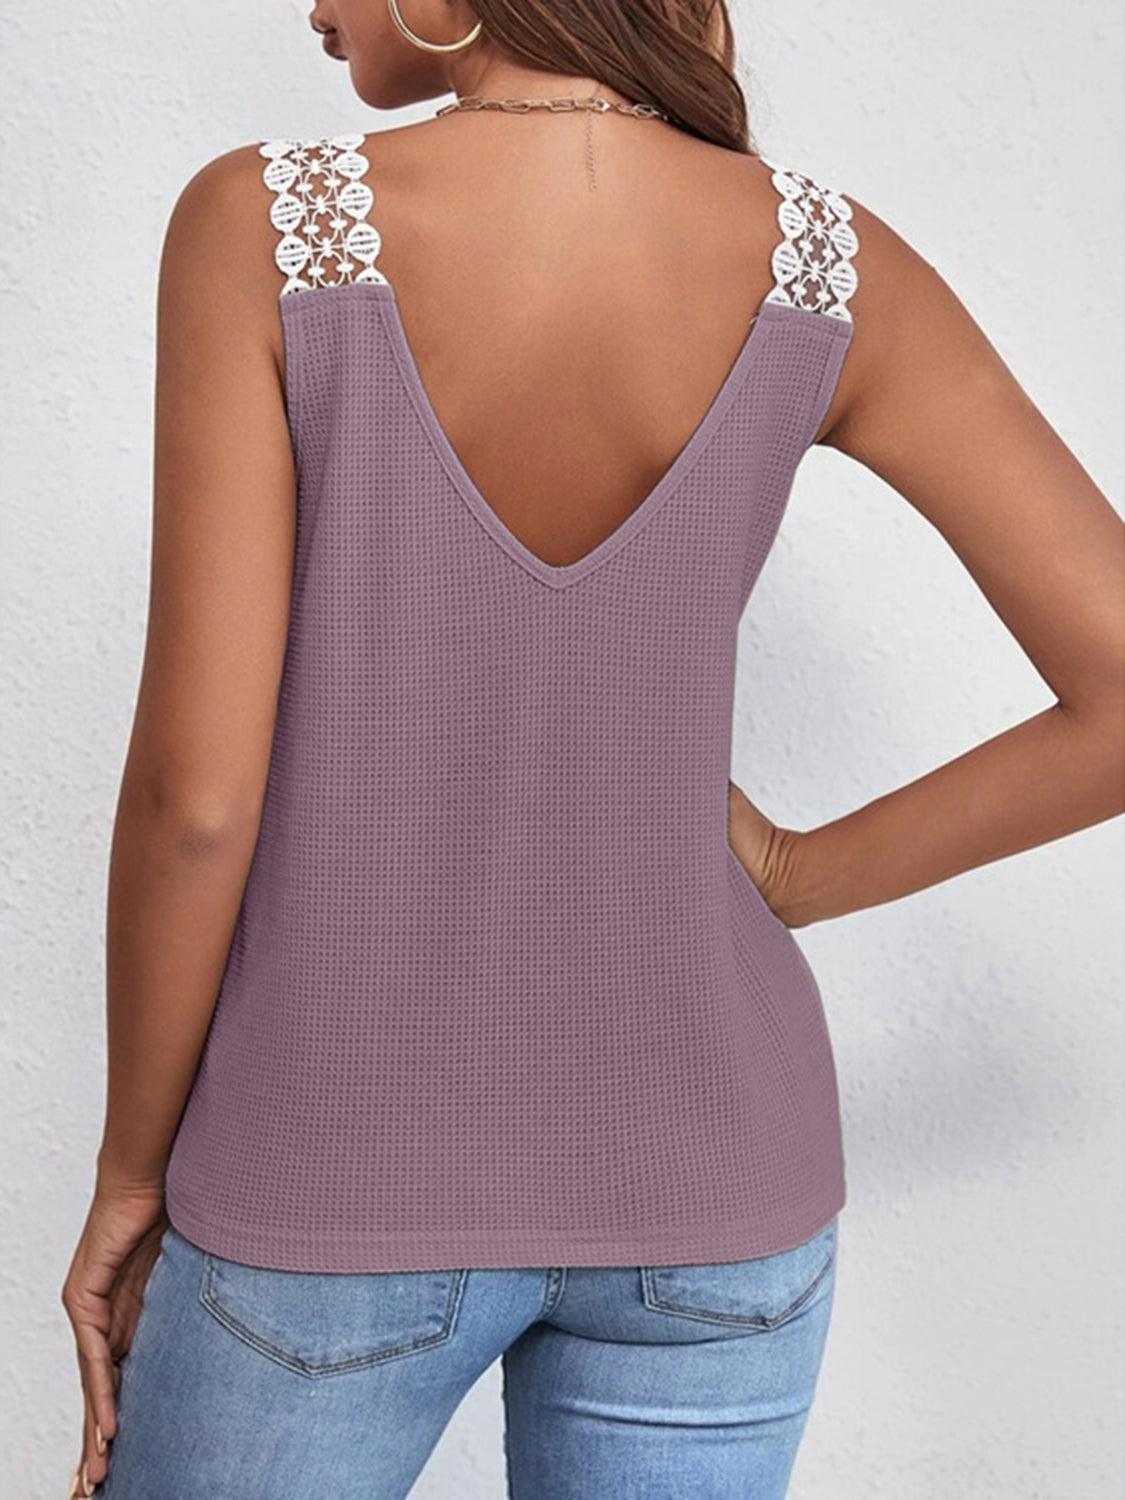 a woman wearing a purple tank top with a lace back